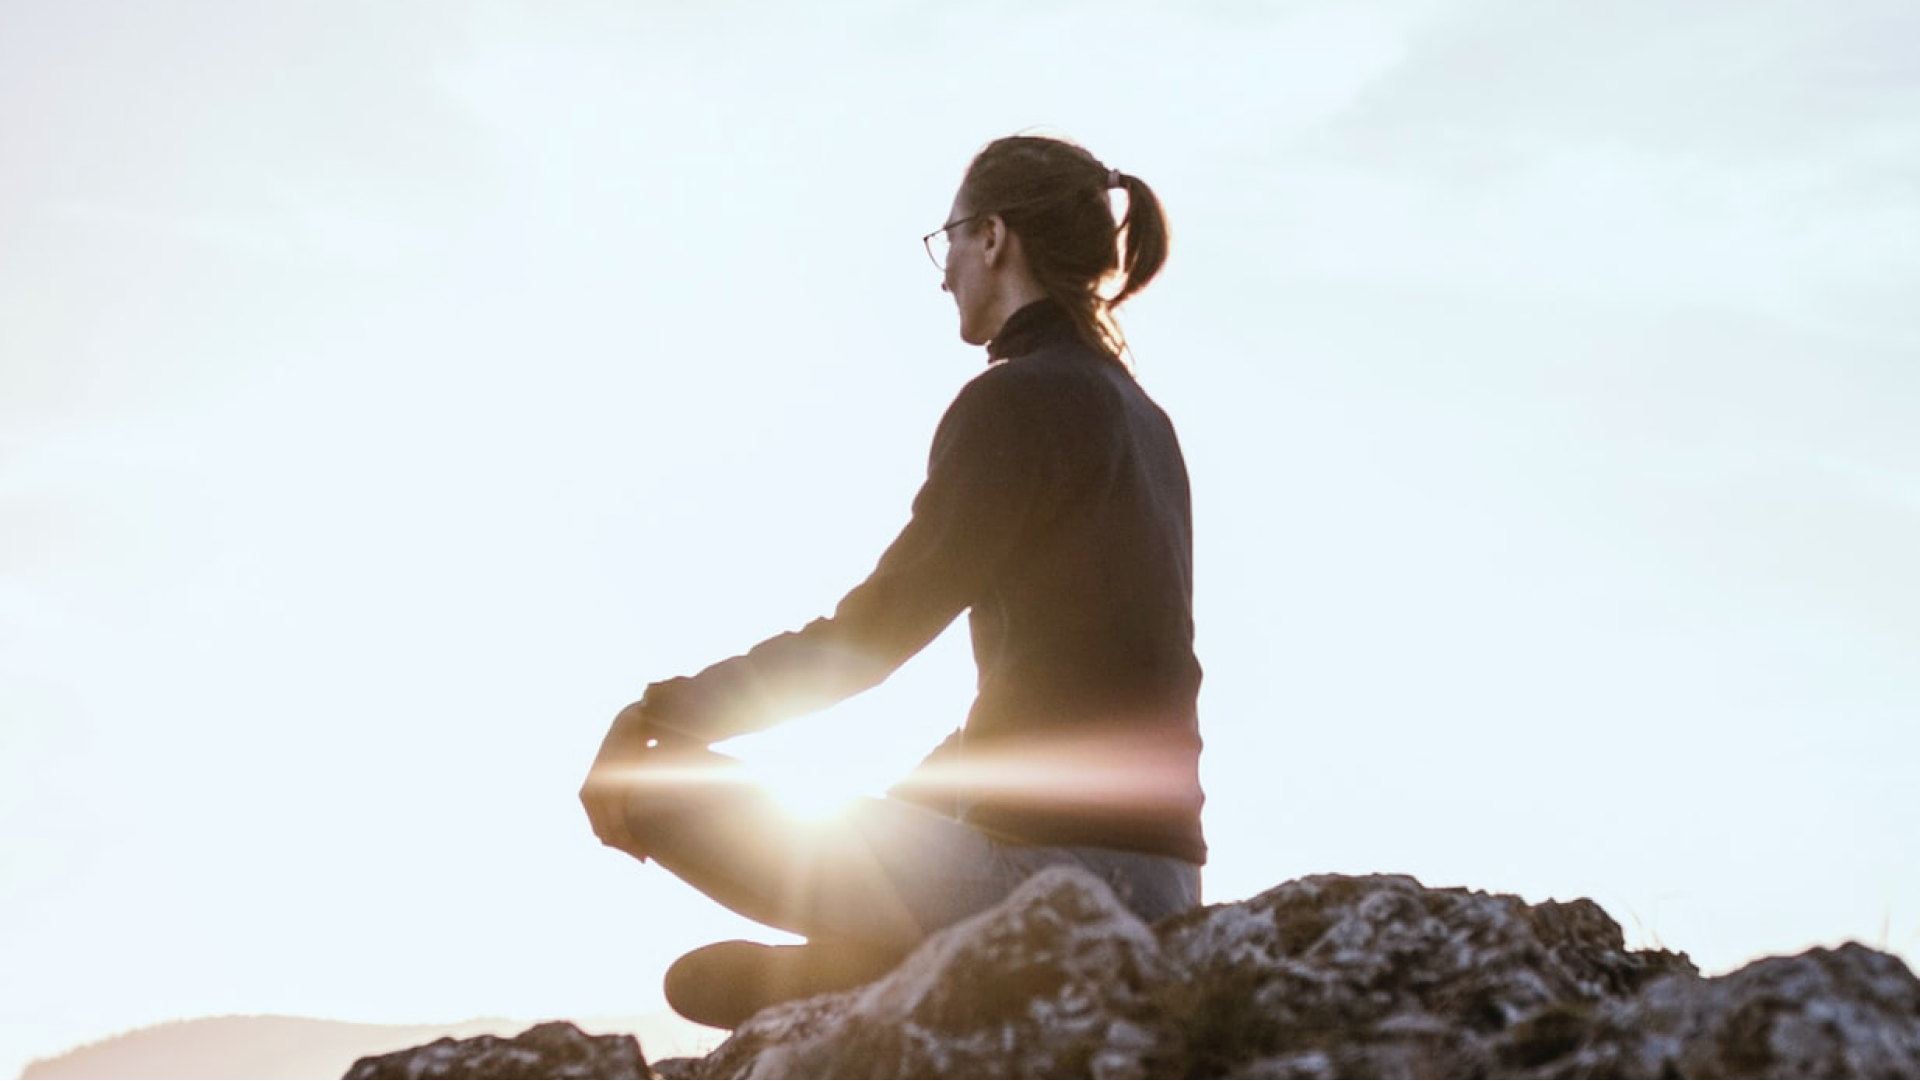 A woman sits mindfully meditating on a rock with sunlight filtering in around her.